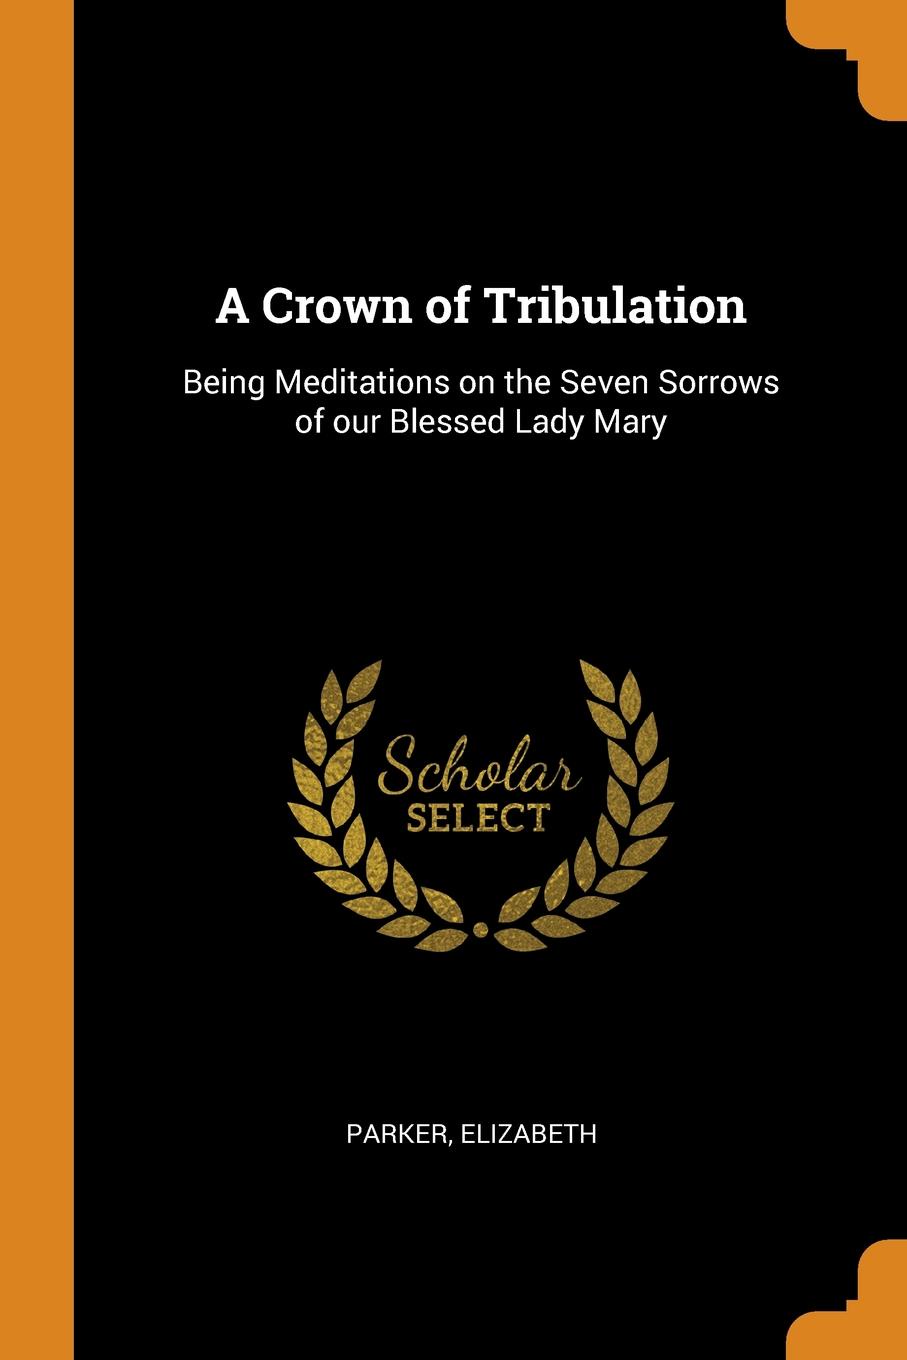 A Crown of Tribulation. Being Meditations on the Seven Sorrows of our Blessed Lady Mary